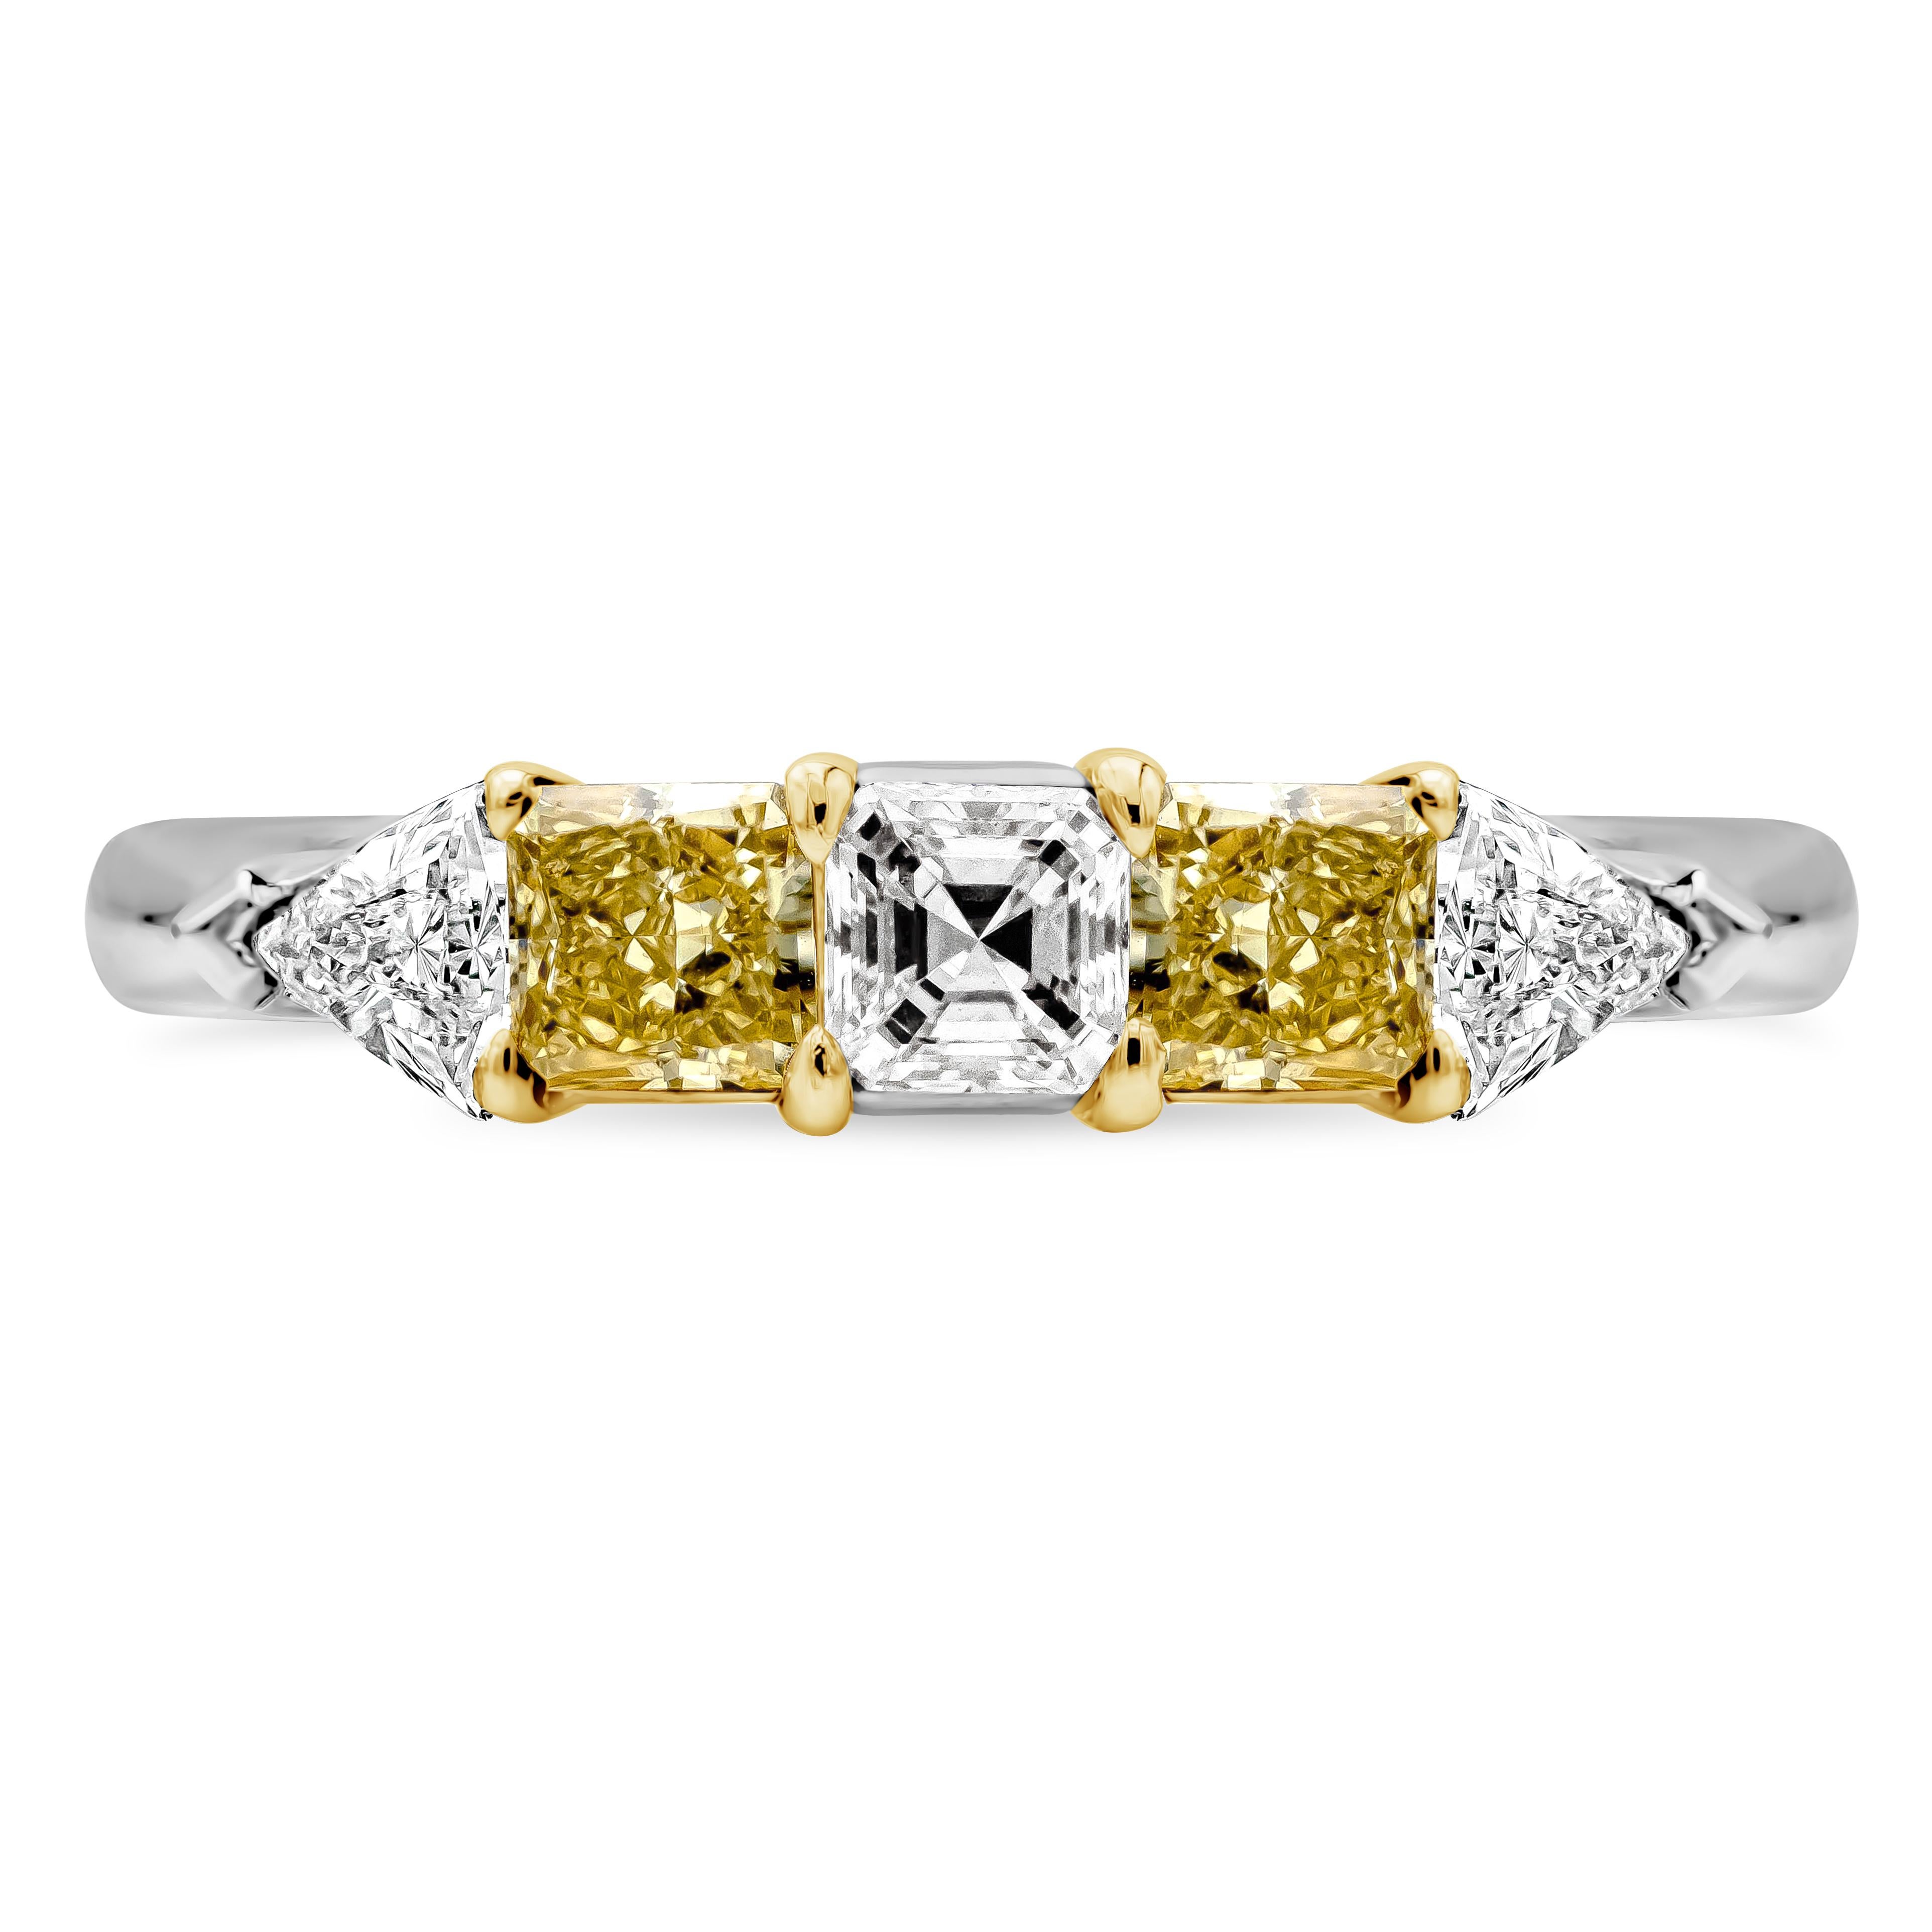 A fashionable piece of jewelry set with an asscher cut diamond center stone weighing 0.28 carats total. Center stone is flanked by two fancy yellow radiant cut diamonds weighing 0.67 carats total. Finished with trillion cut diamonds on each side